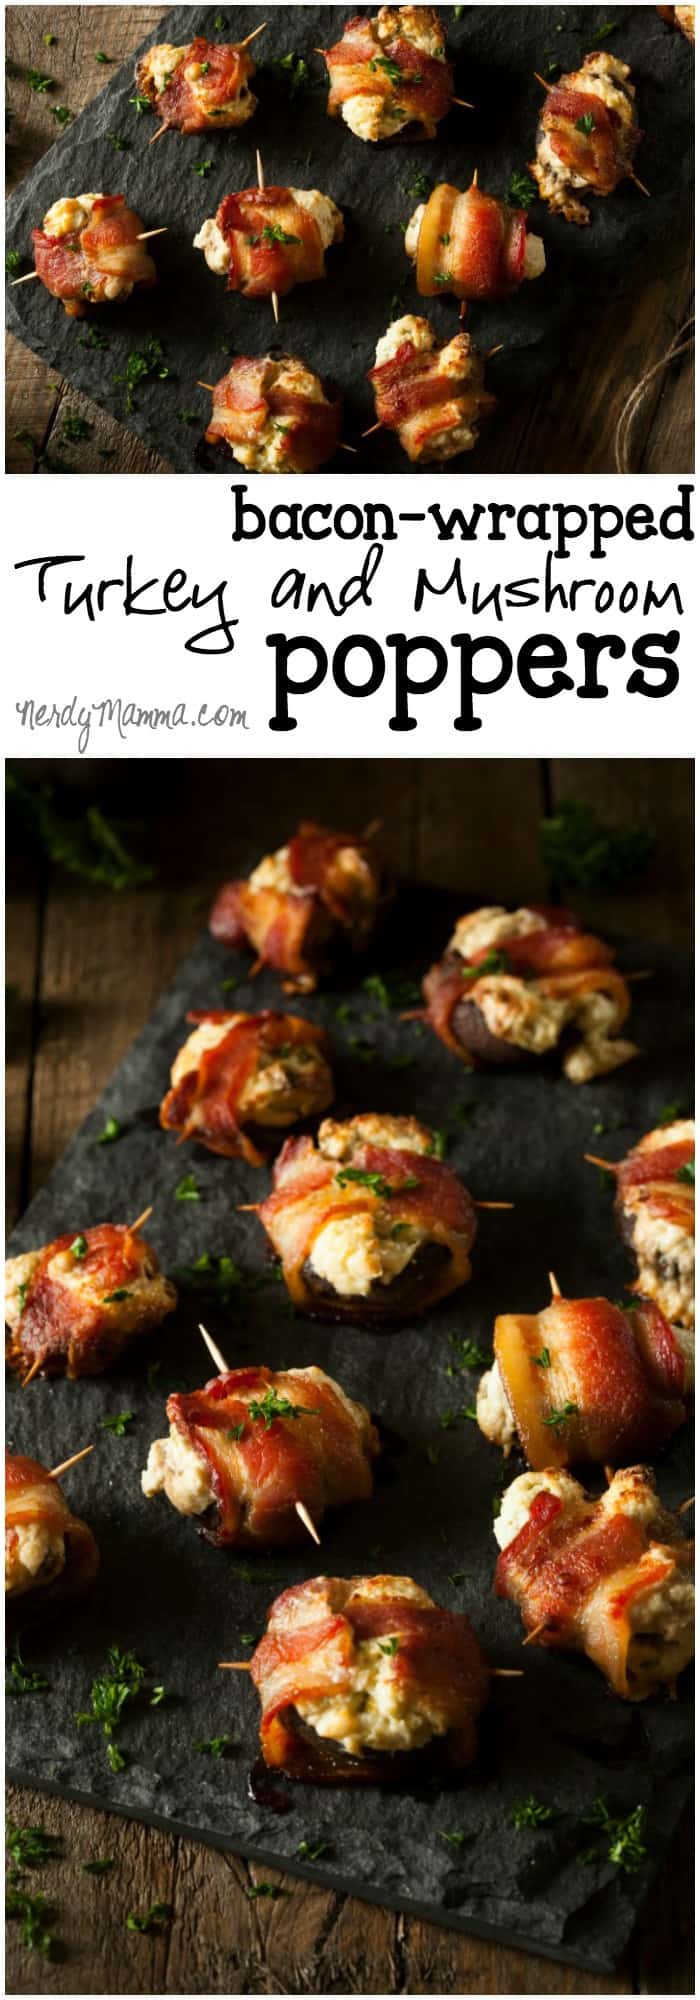 These delicious bacon-wraped turkey and mushroom poppers are the perfect appetizer recipe for a New Years party or just an awesome use of leftover turkey. LOVE!